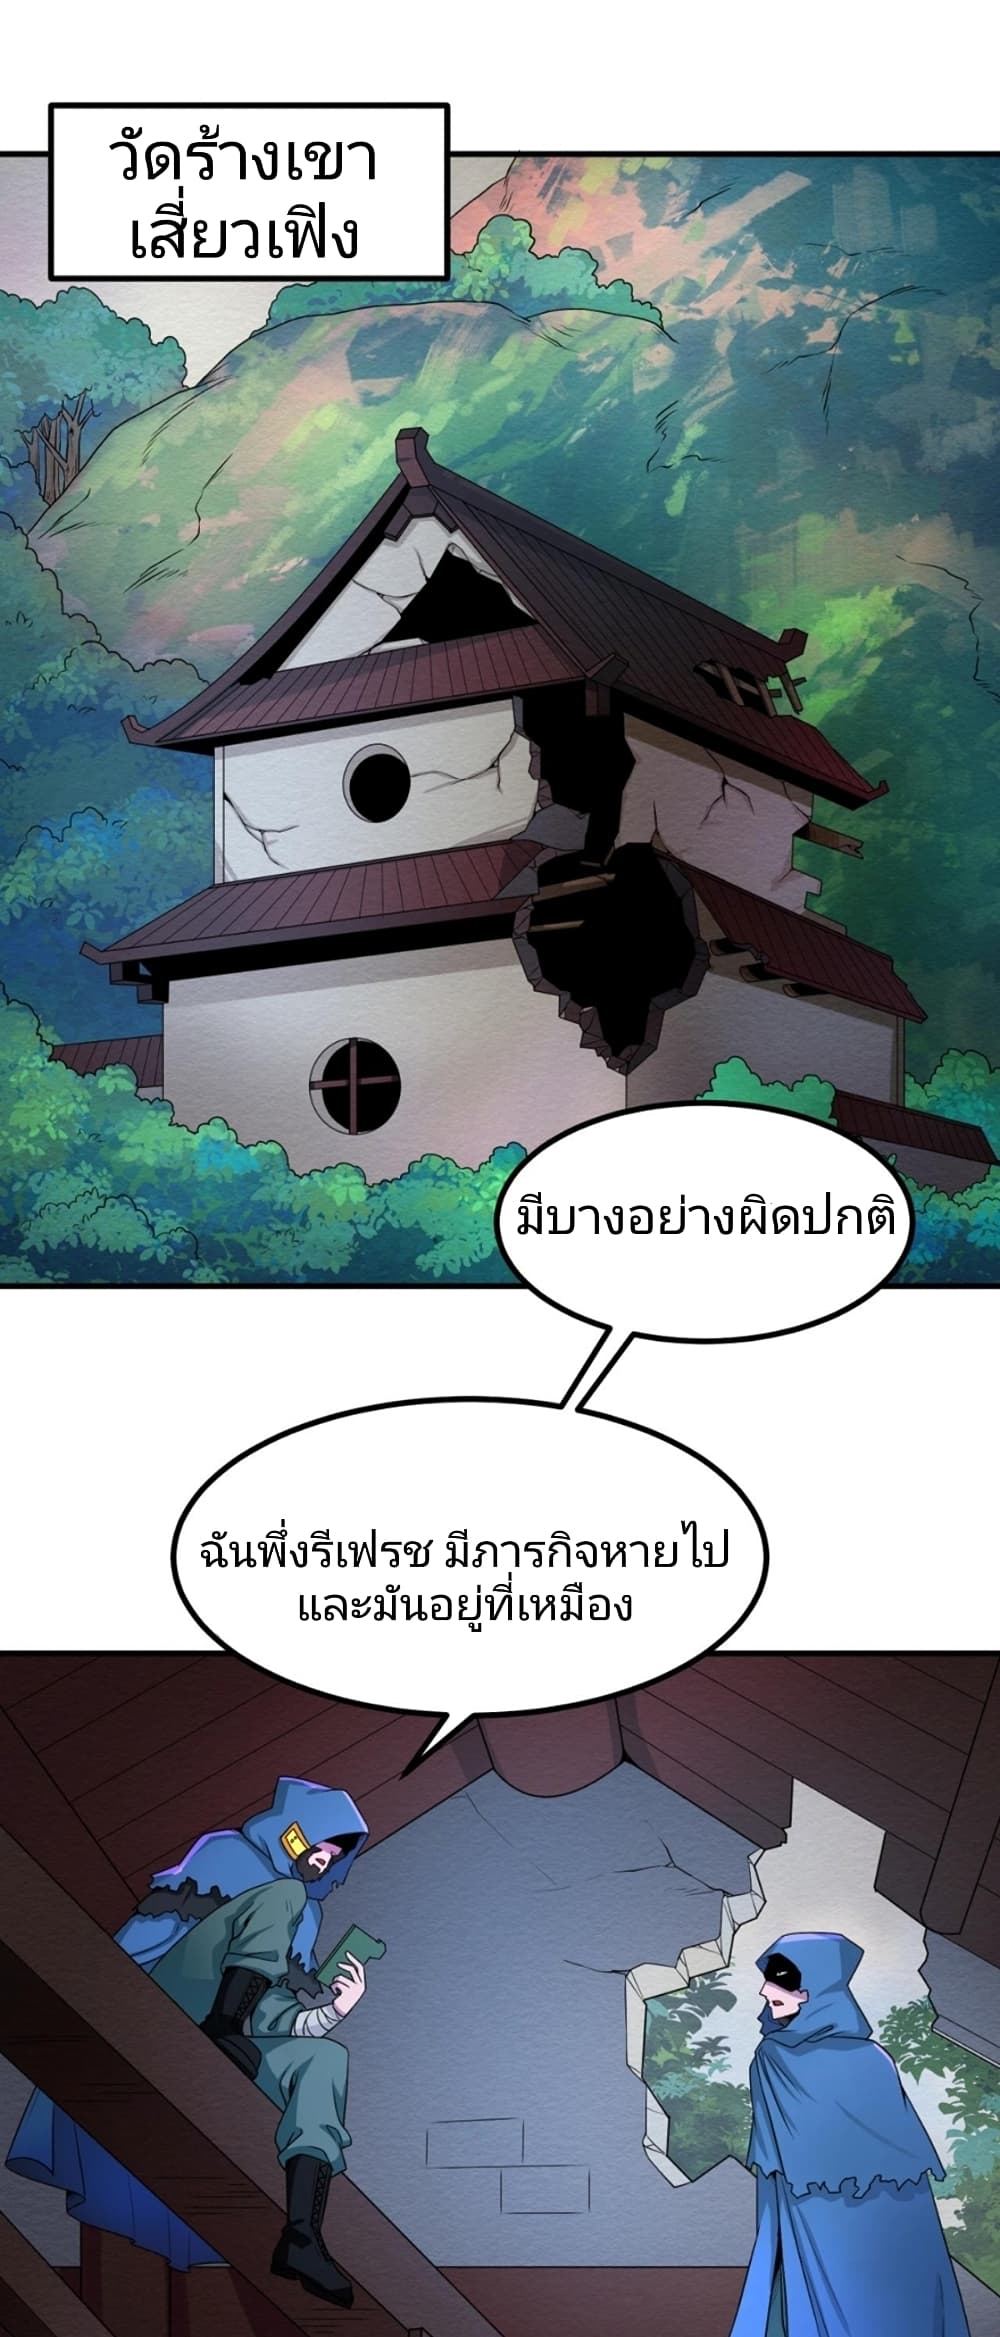 The Age of Ghost Spirits à¸à¸­à¸à¸à¸µà¹ 9 (33)